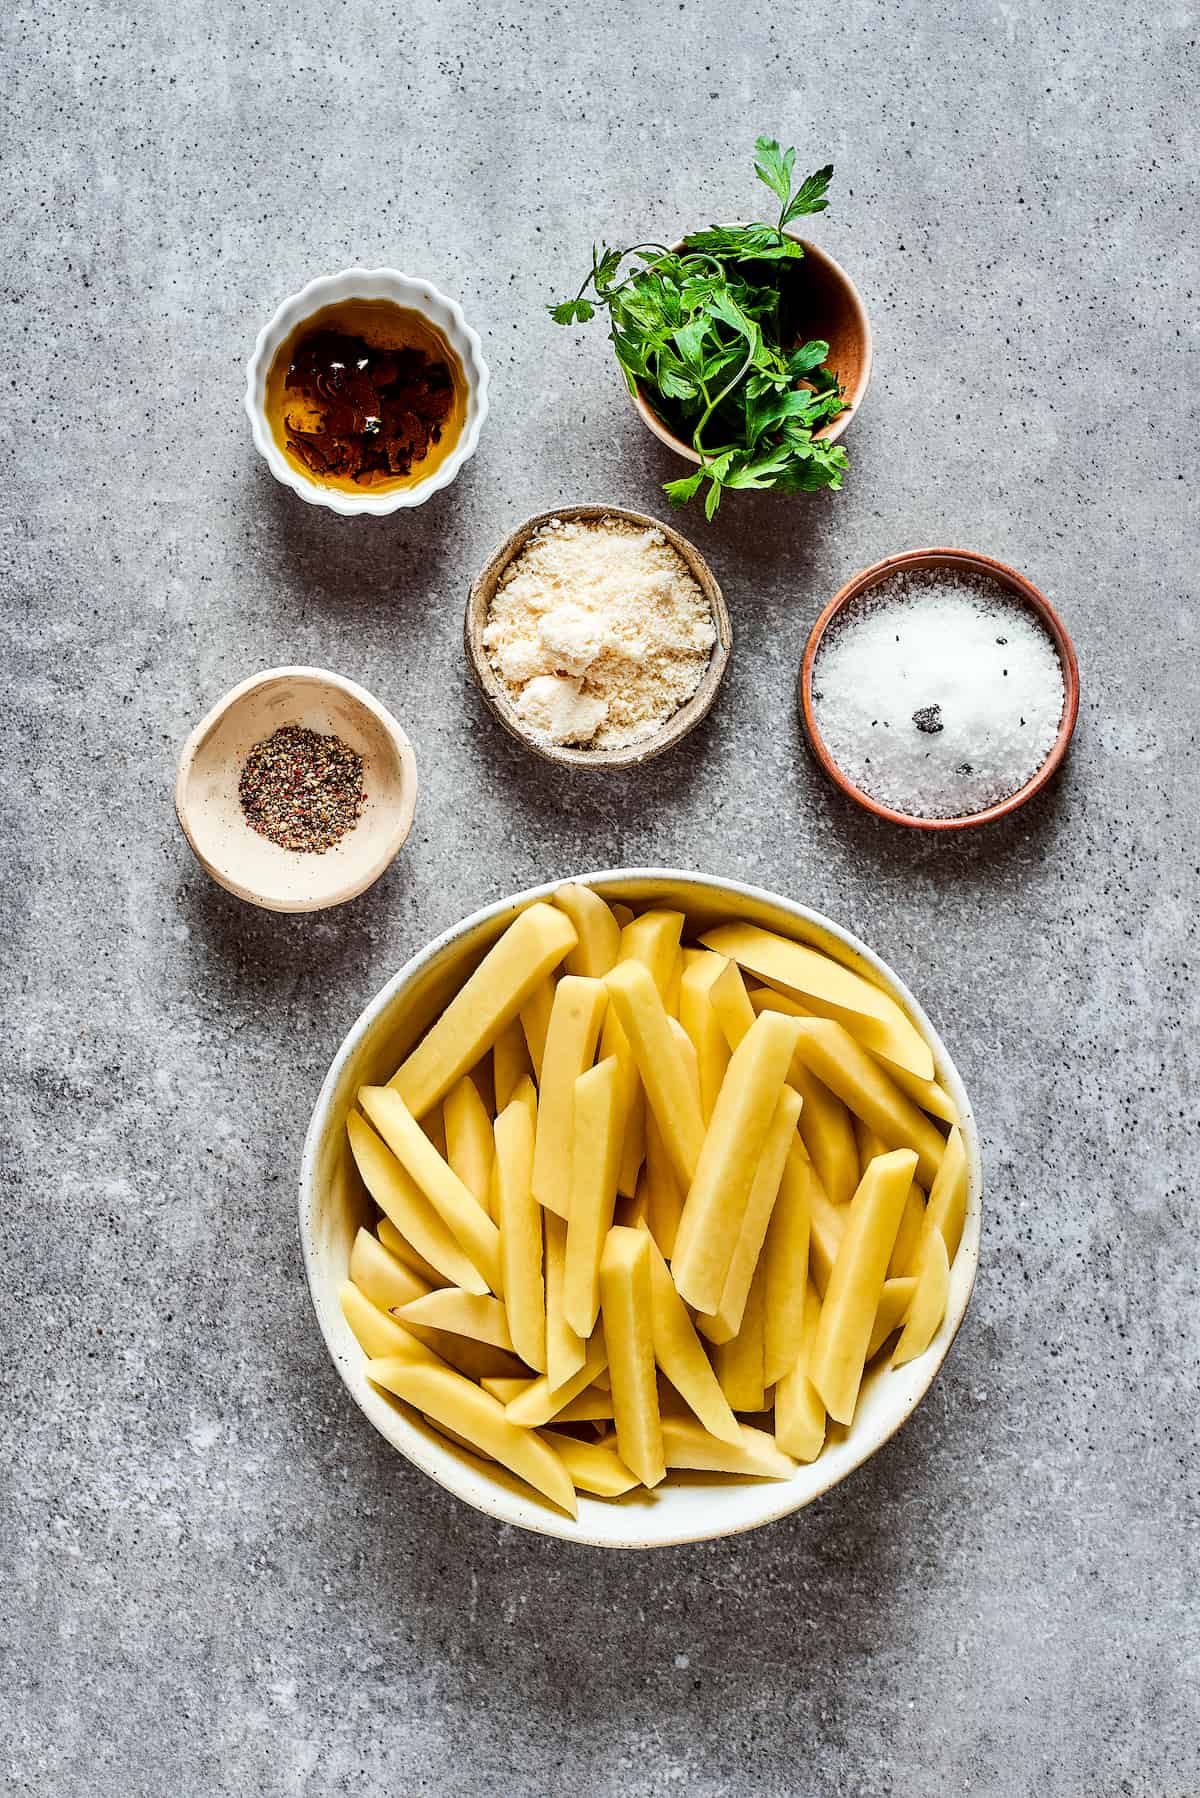 Ingredients needed to make truffle fries - potatoes, cheese, truffle salt, truffle oil, and parsley.